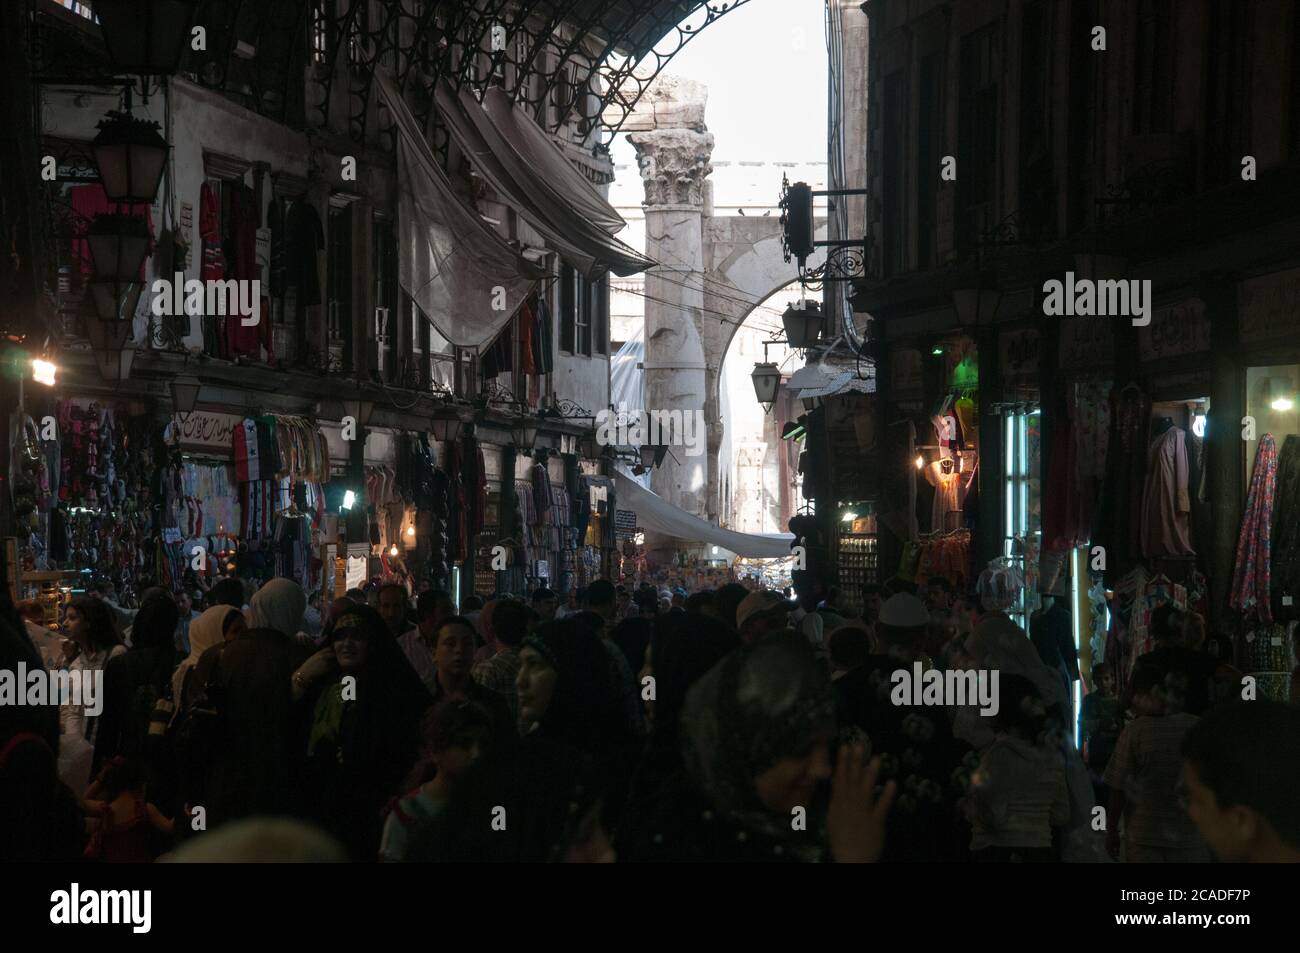 Syrian shoppers walk through the busy and crowded al Hamidiyah market, a typical Middle Eastern souq in the old city of Damascus, Syria. Stock Photo